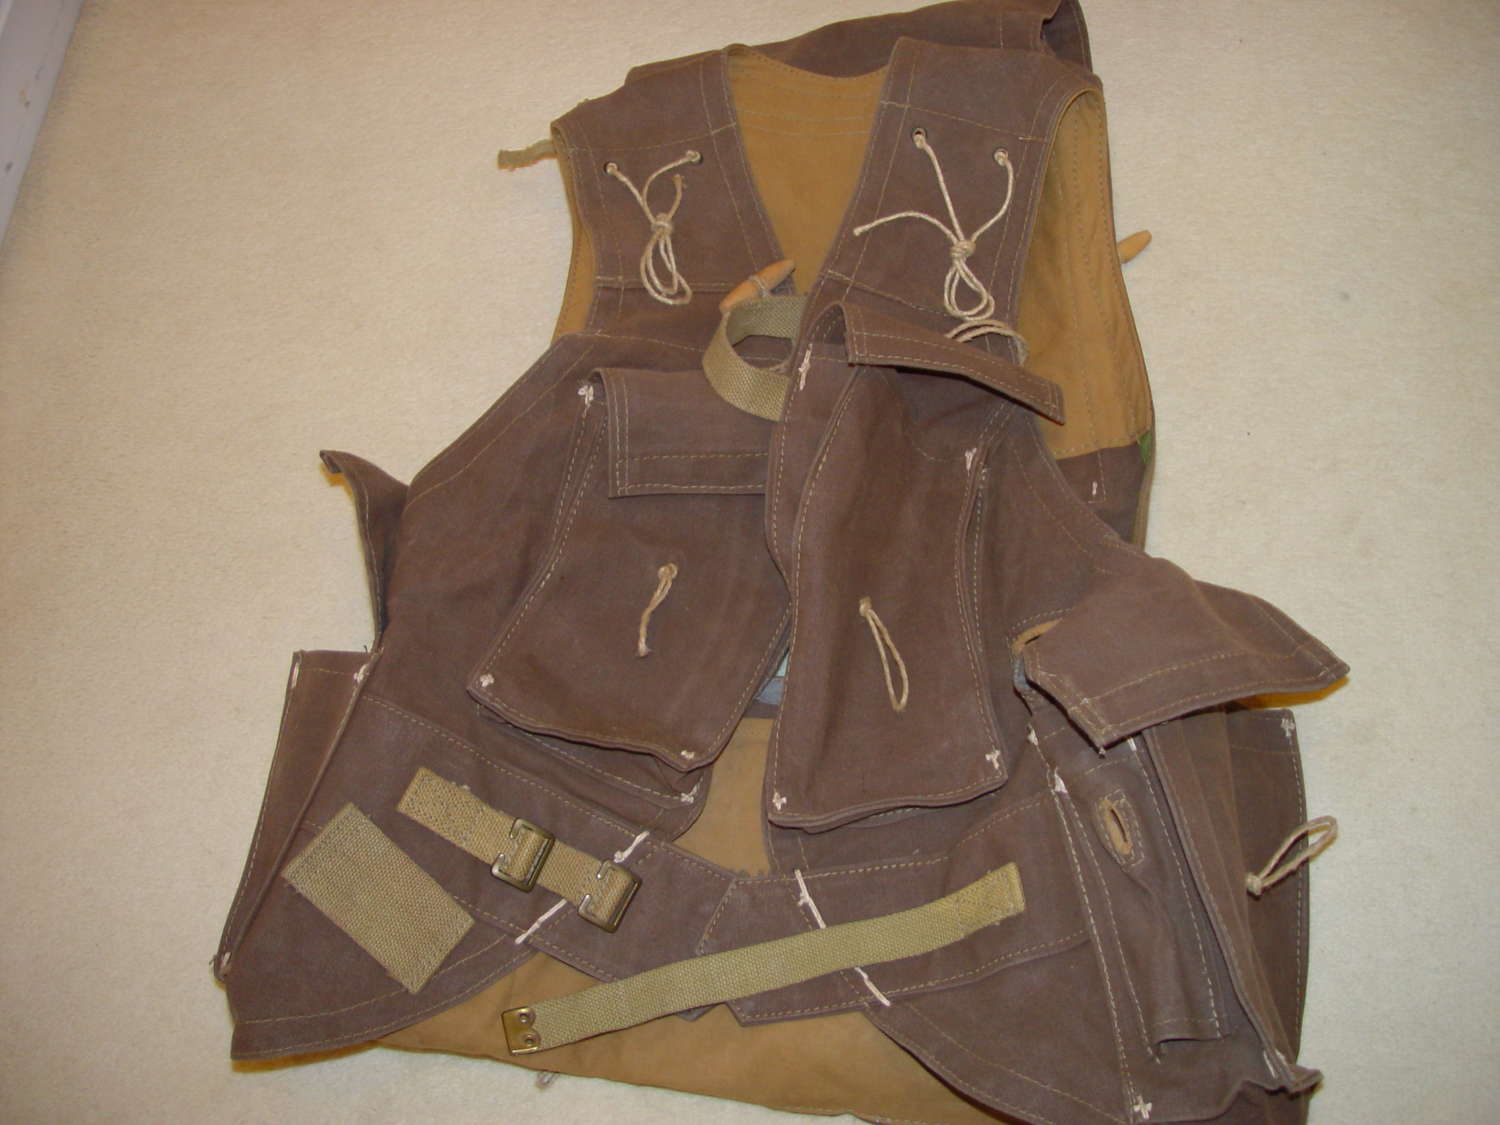 British/Canadian Army D-day assault vest - replica